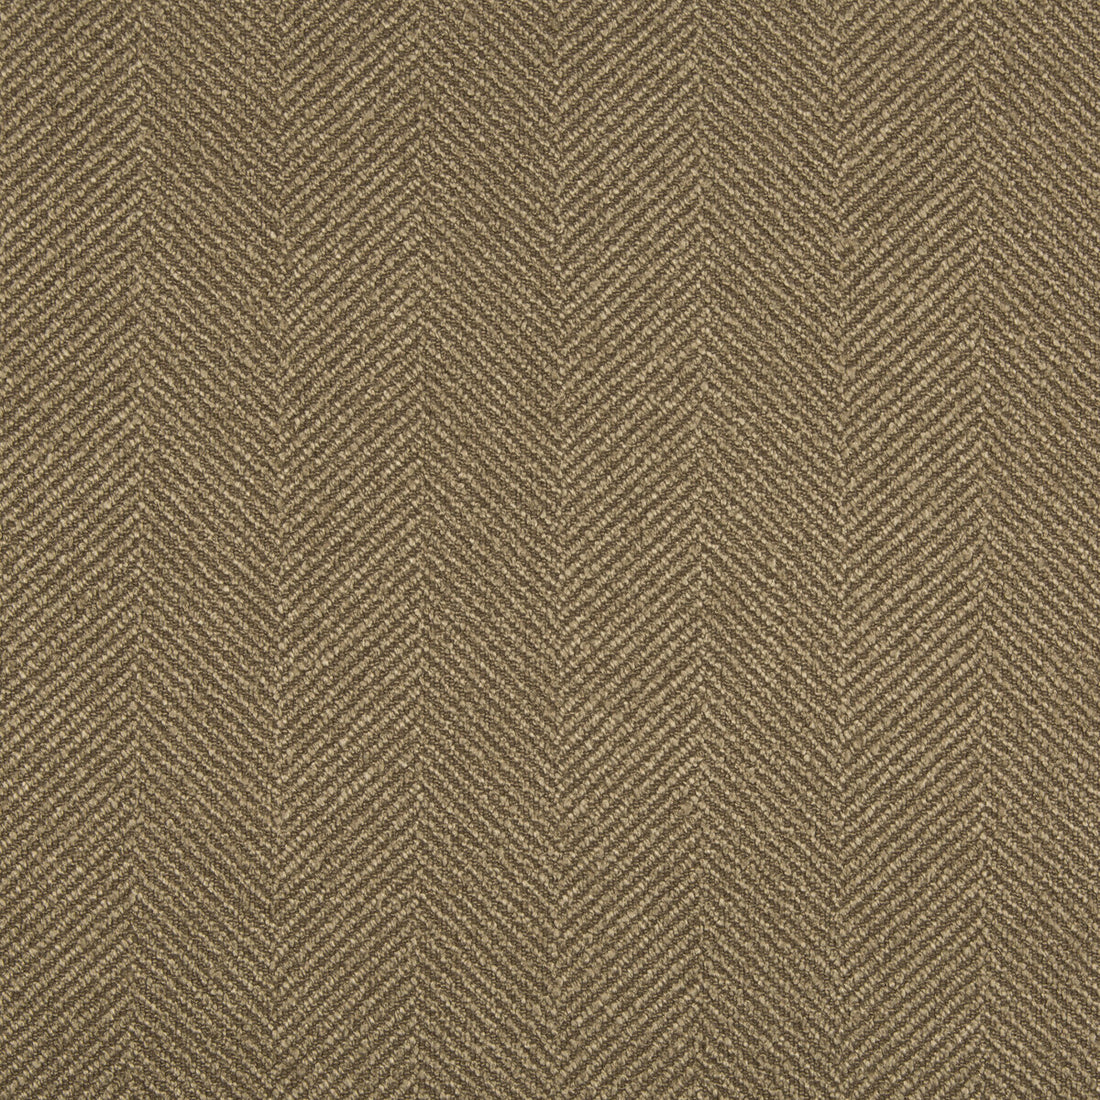 Kravet Smart fabric in 34631-6 color - pattern 34631.6.0 - by Kravet Smart in the Performance Crypton Home collection